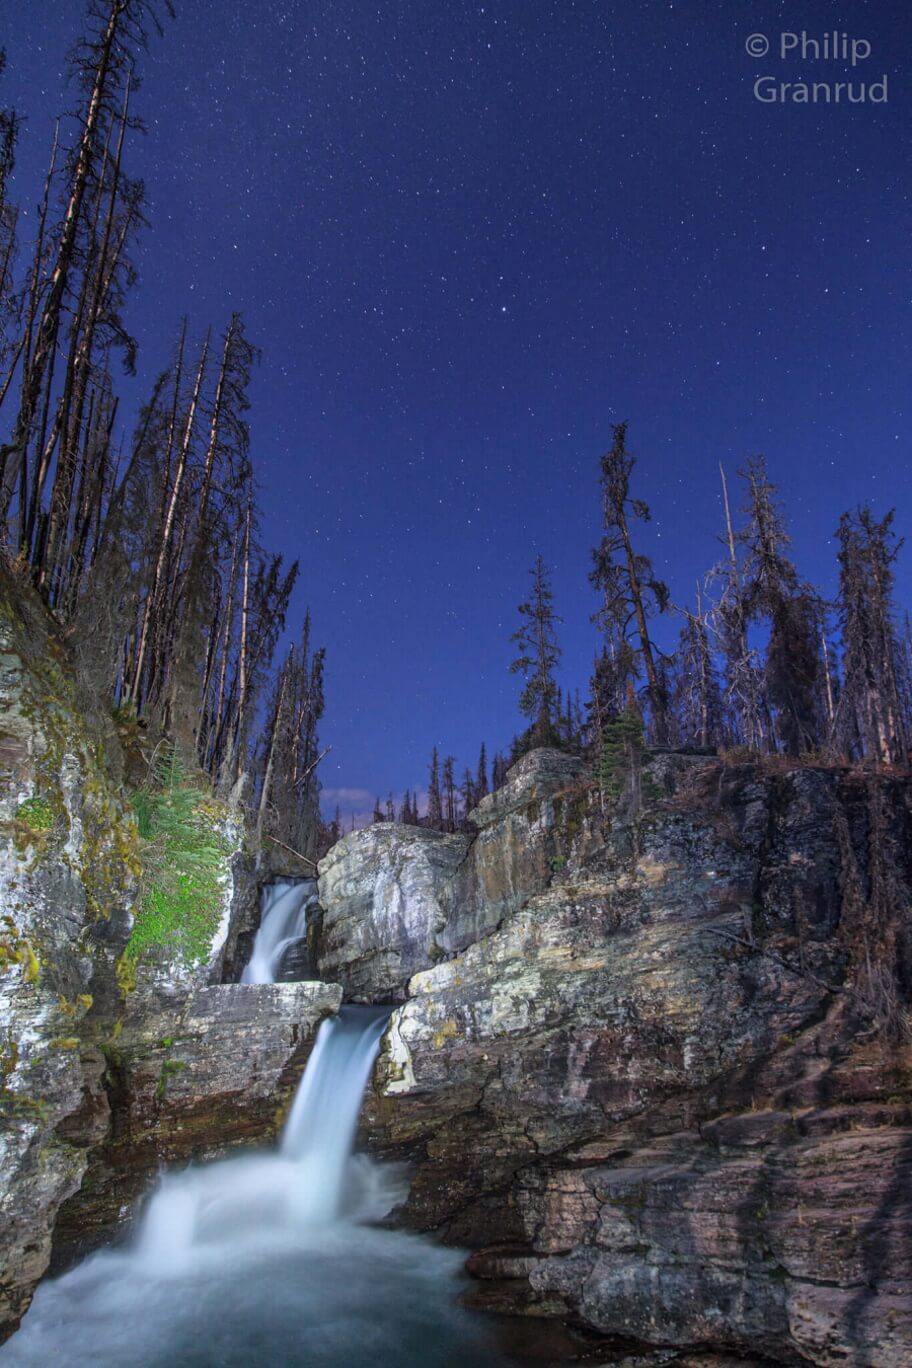 Night sky with stars in Glacier National Park with a waterfall and cliffs in foreground